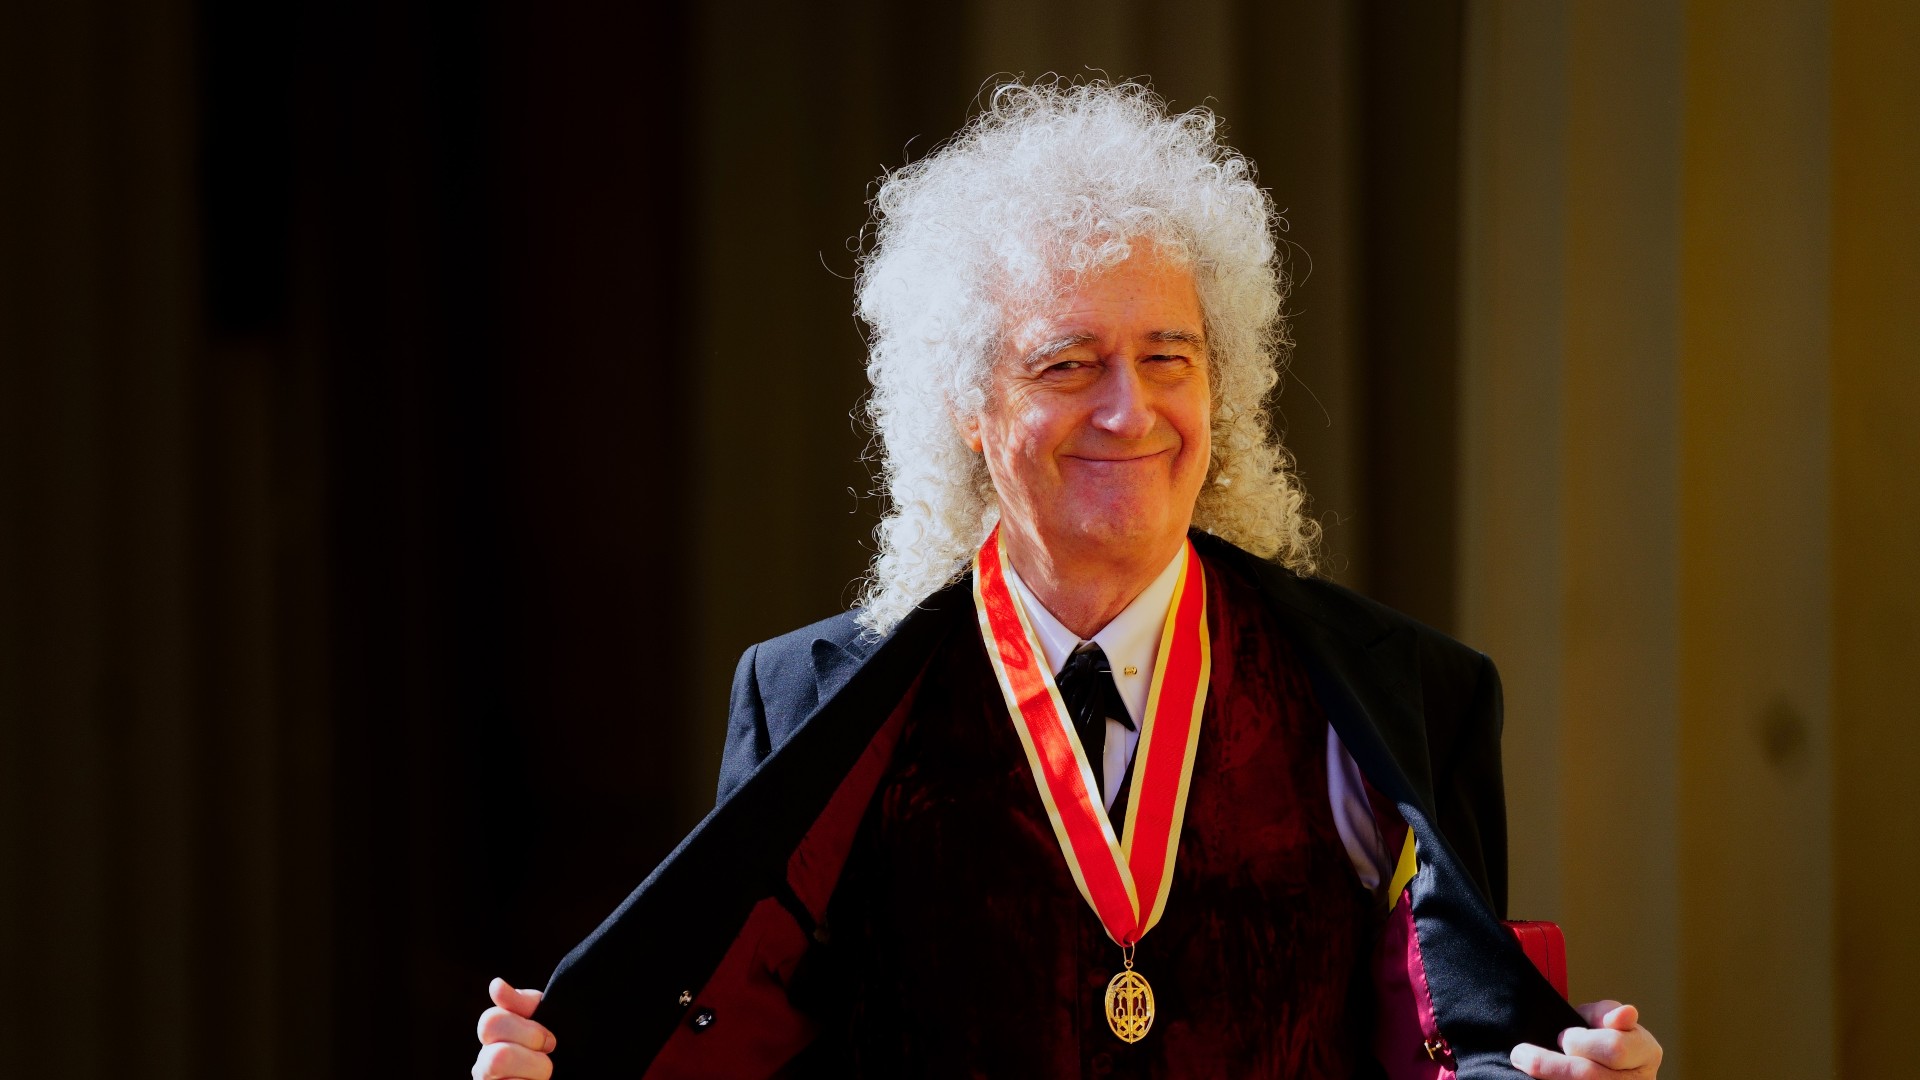 : Sir Brian May after being made a Knight Bachelor for services to music and charity by King Charles III during an investiture ceremony at Buckingham Palace on March 14, 2023 in London, England.